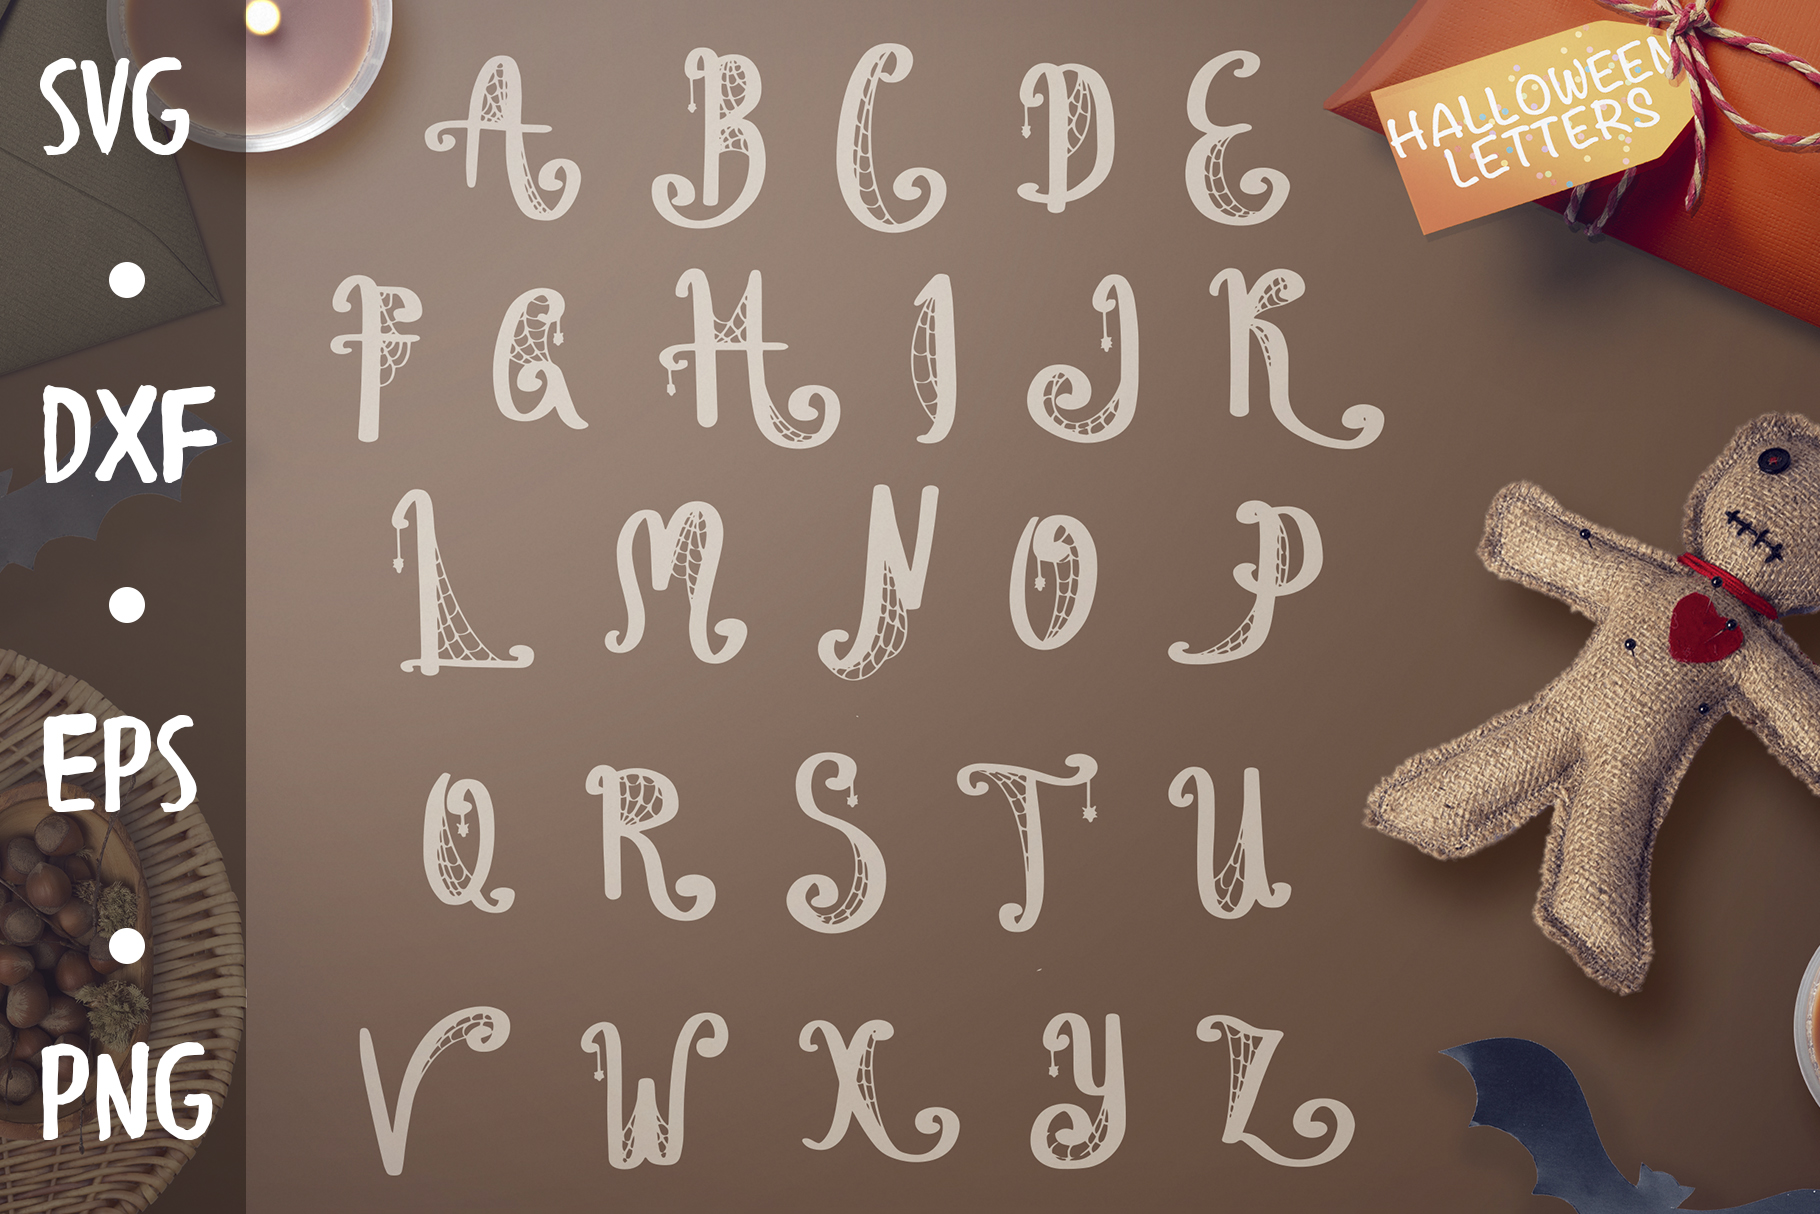 Halloween letters SVG CUT FILE